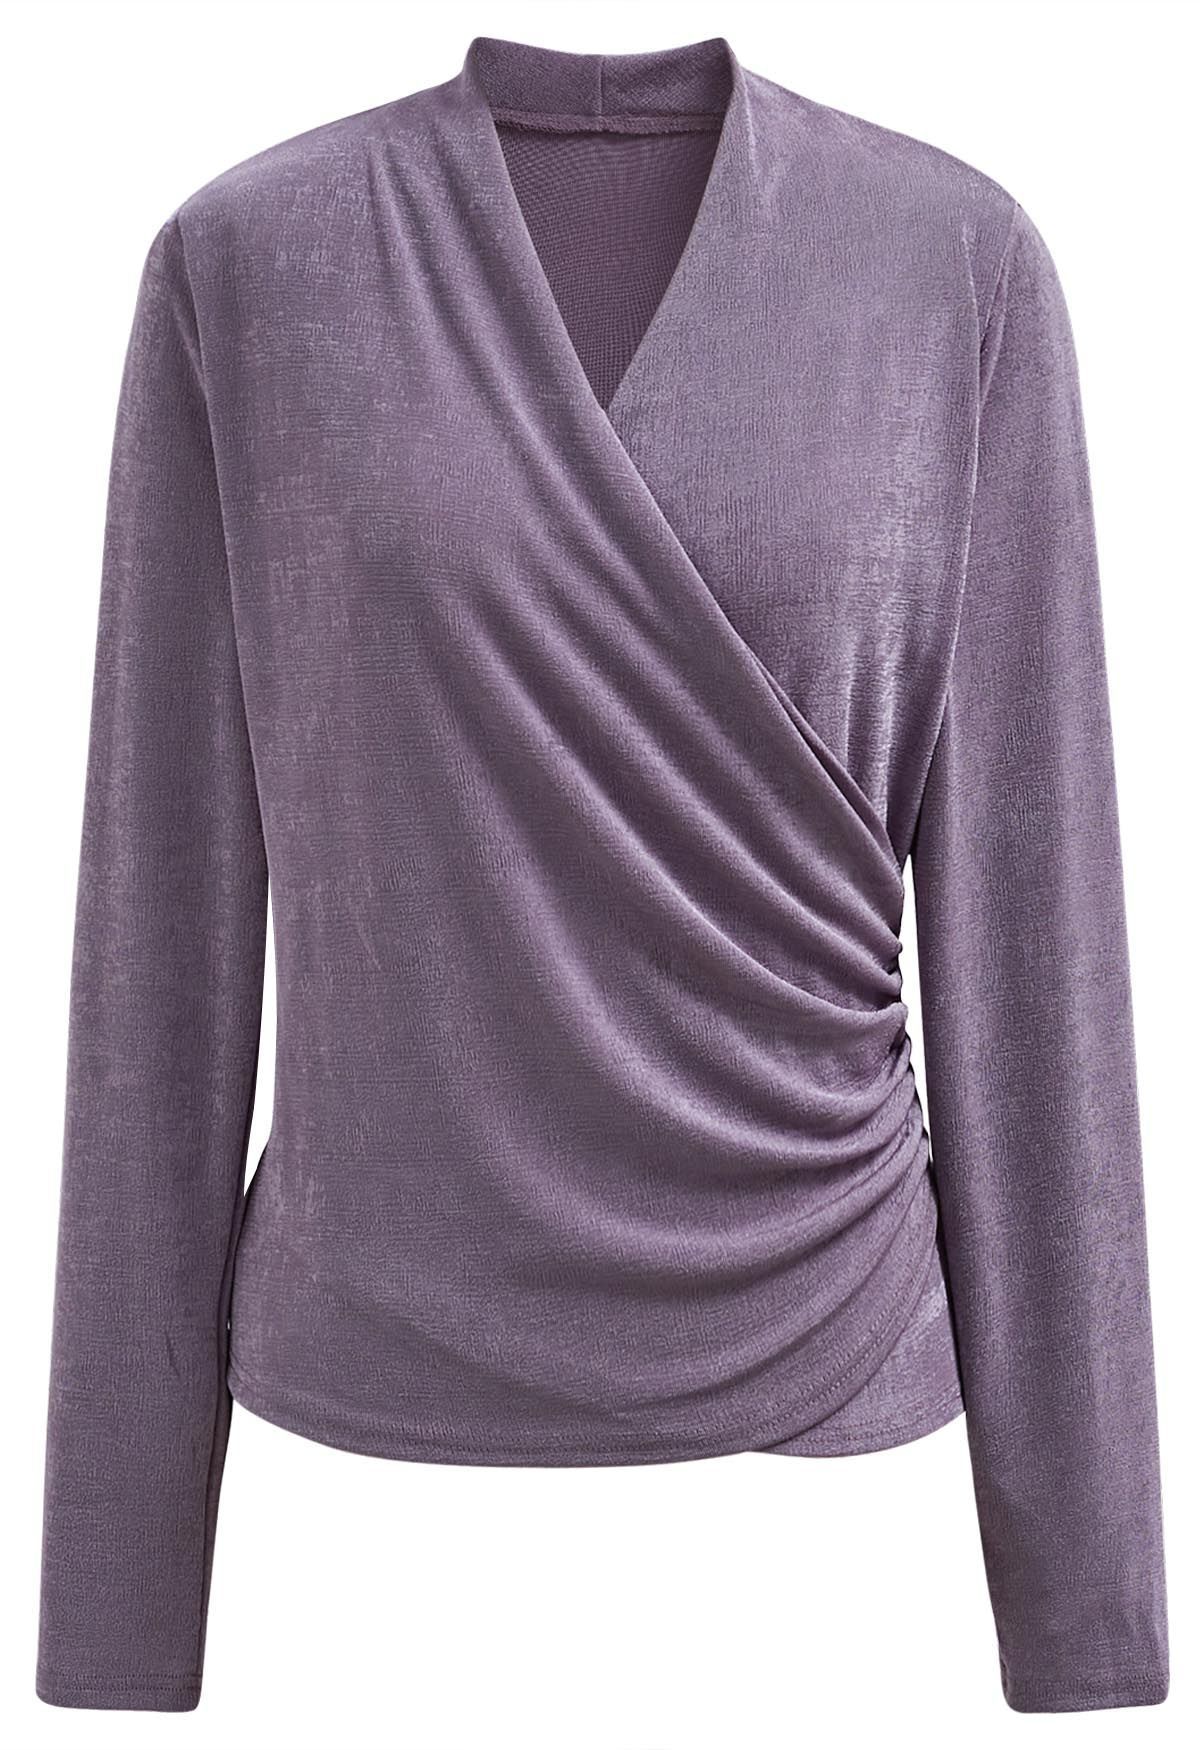 Ruched Waist Faux-Wrap Top in Lilac